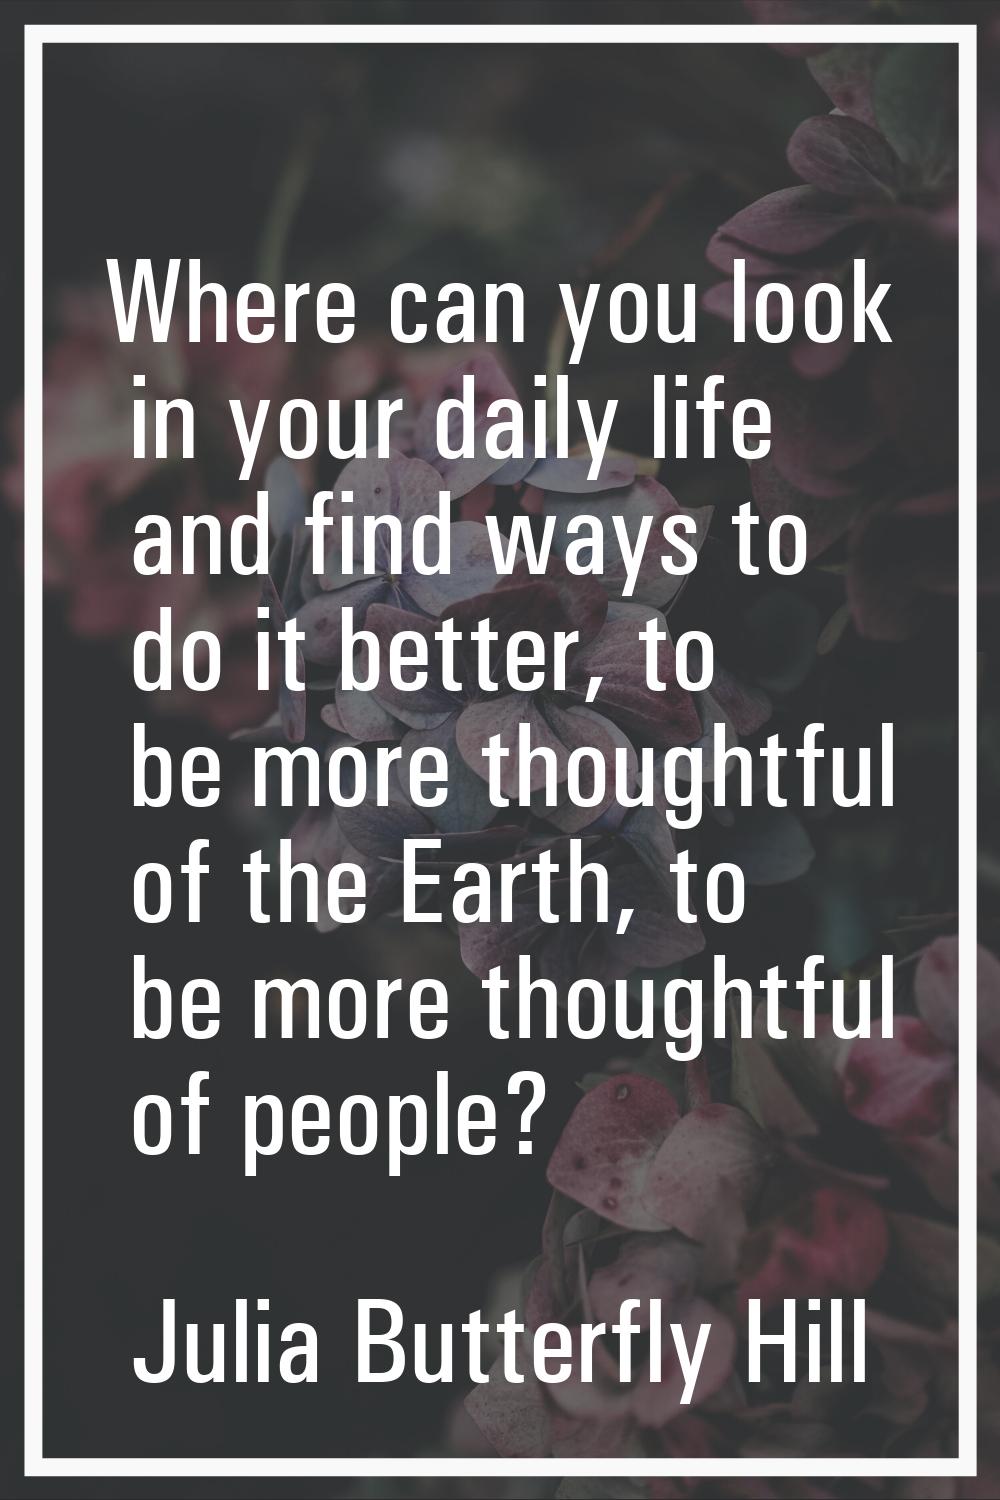 Where can you look in your daily life and find ways to do it better, to be more thoughtful of the E